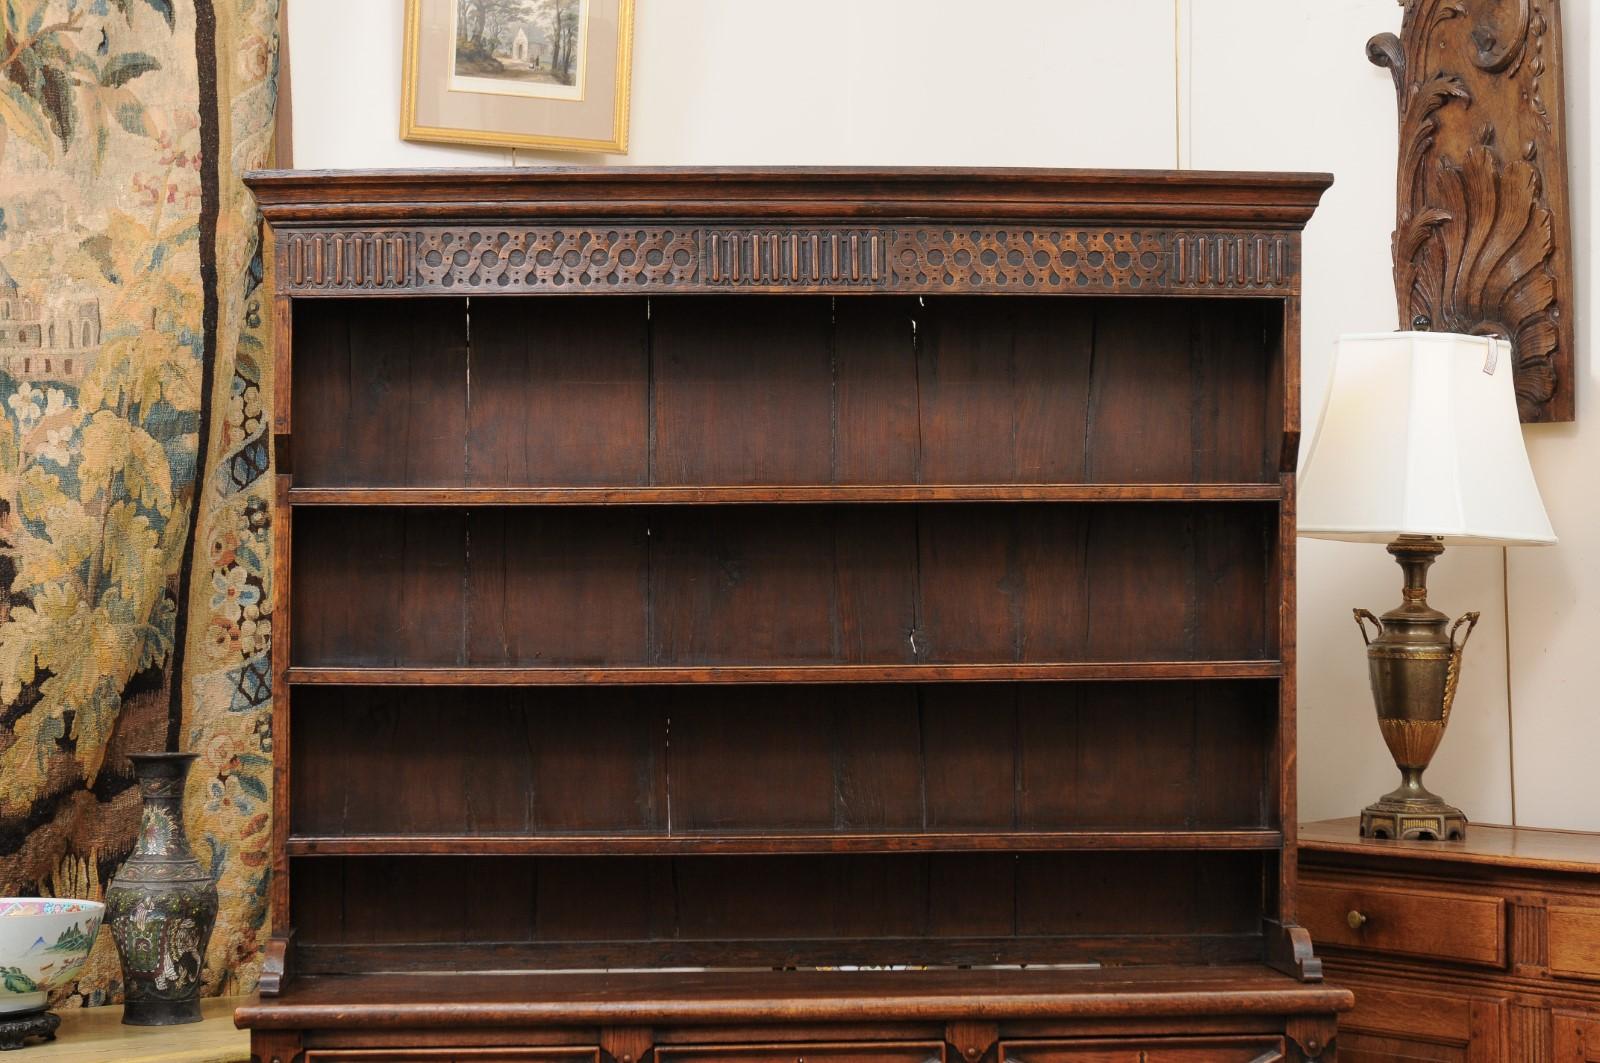 19th Century English Jacobean Style Oak Dresser Base with 2 Cabinets, Drawers, and Optional Plate Rack